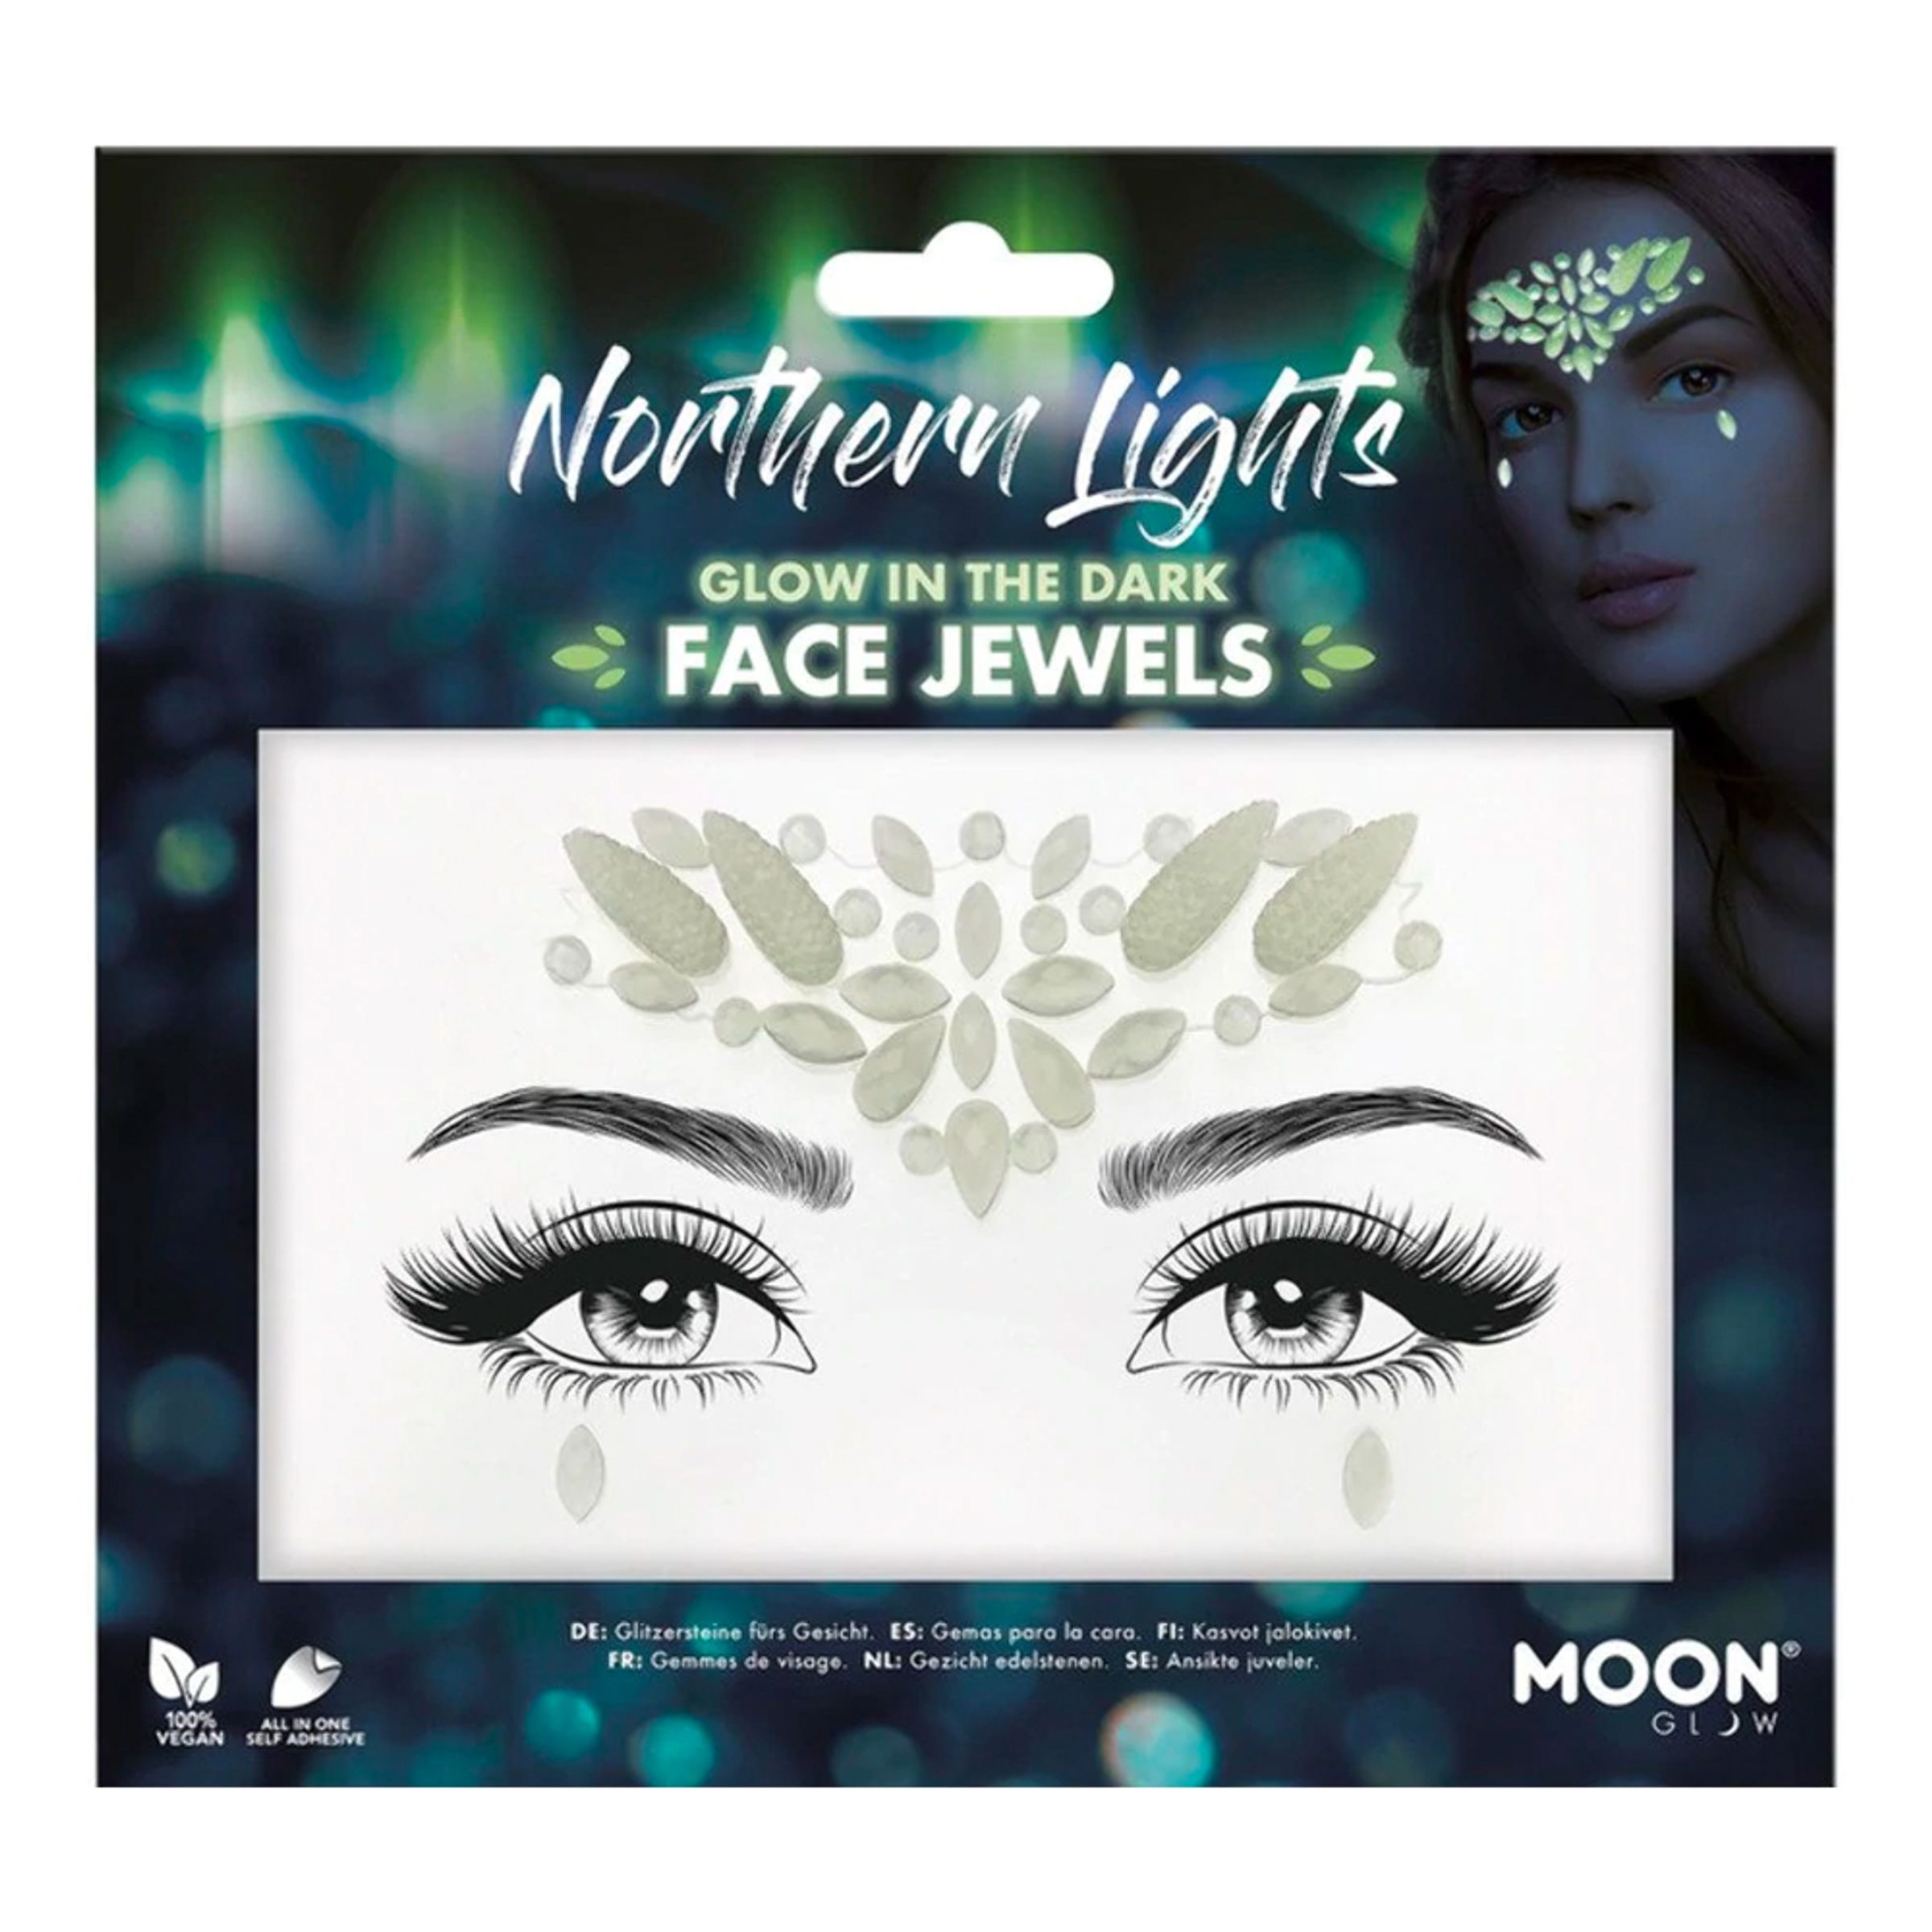 Face Jewels Glow in the Dark Northern Lights